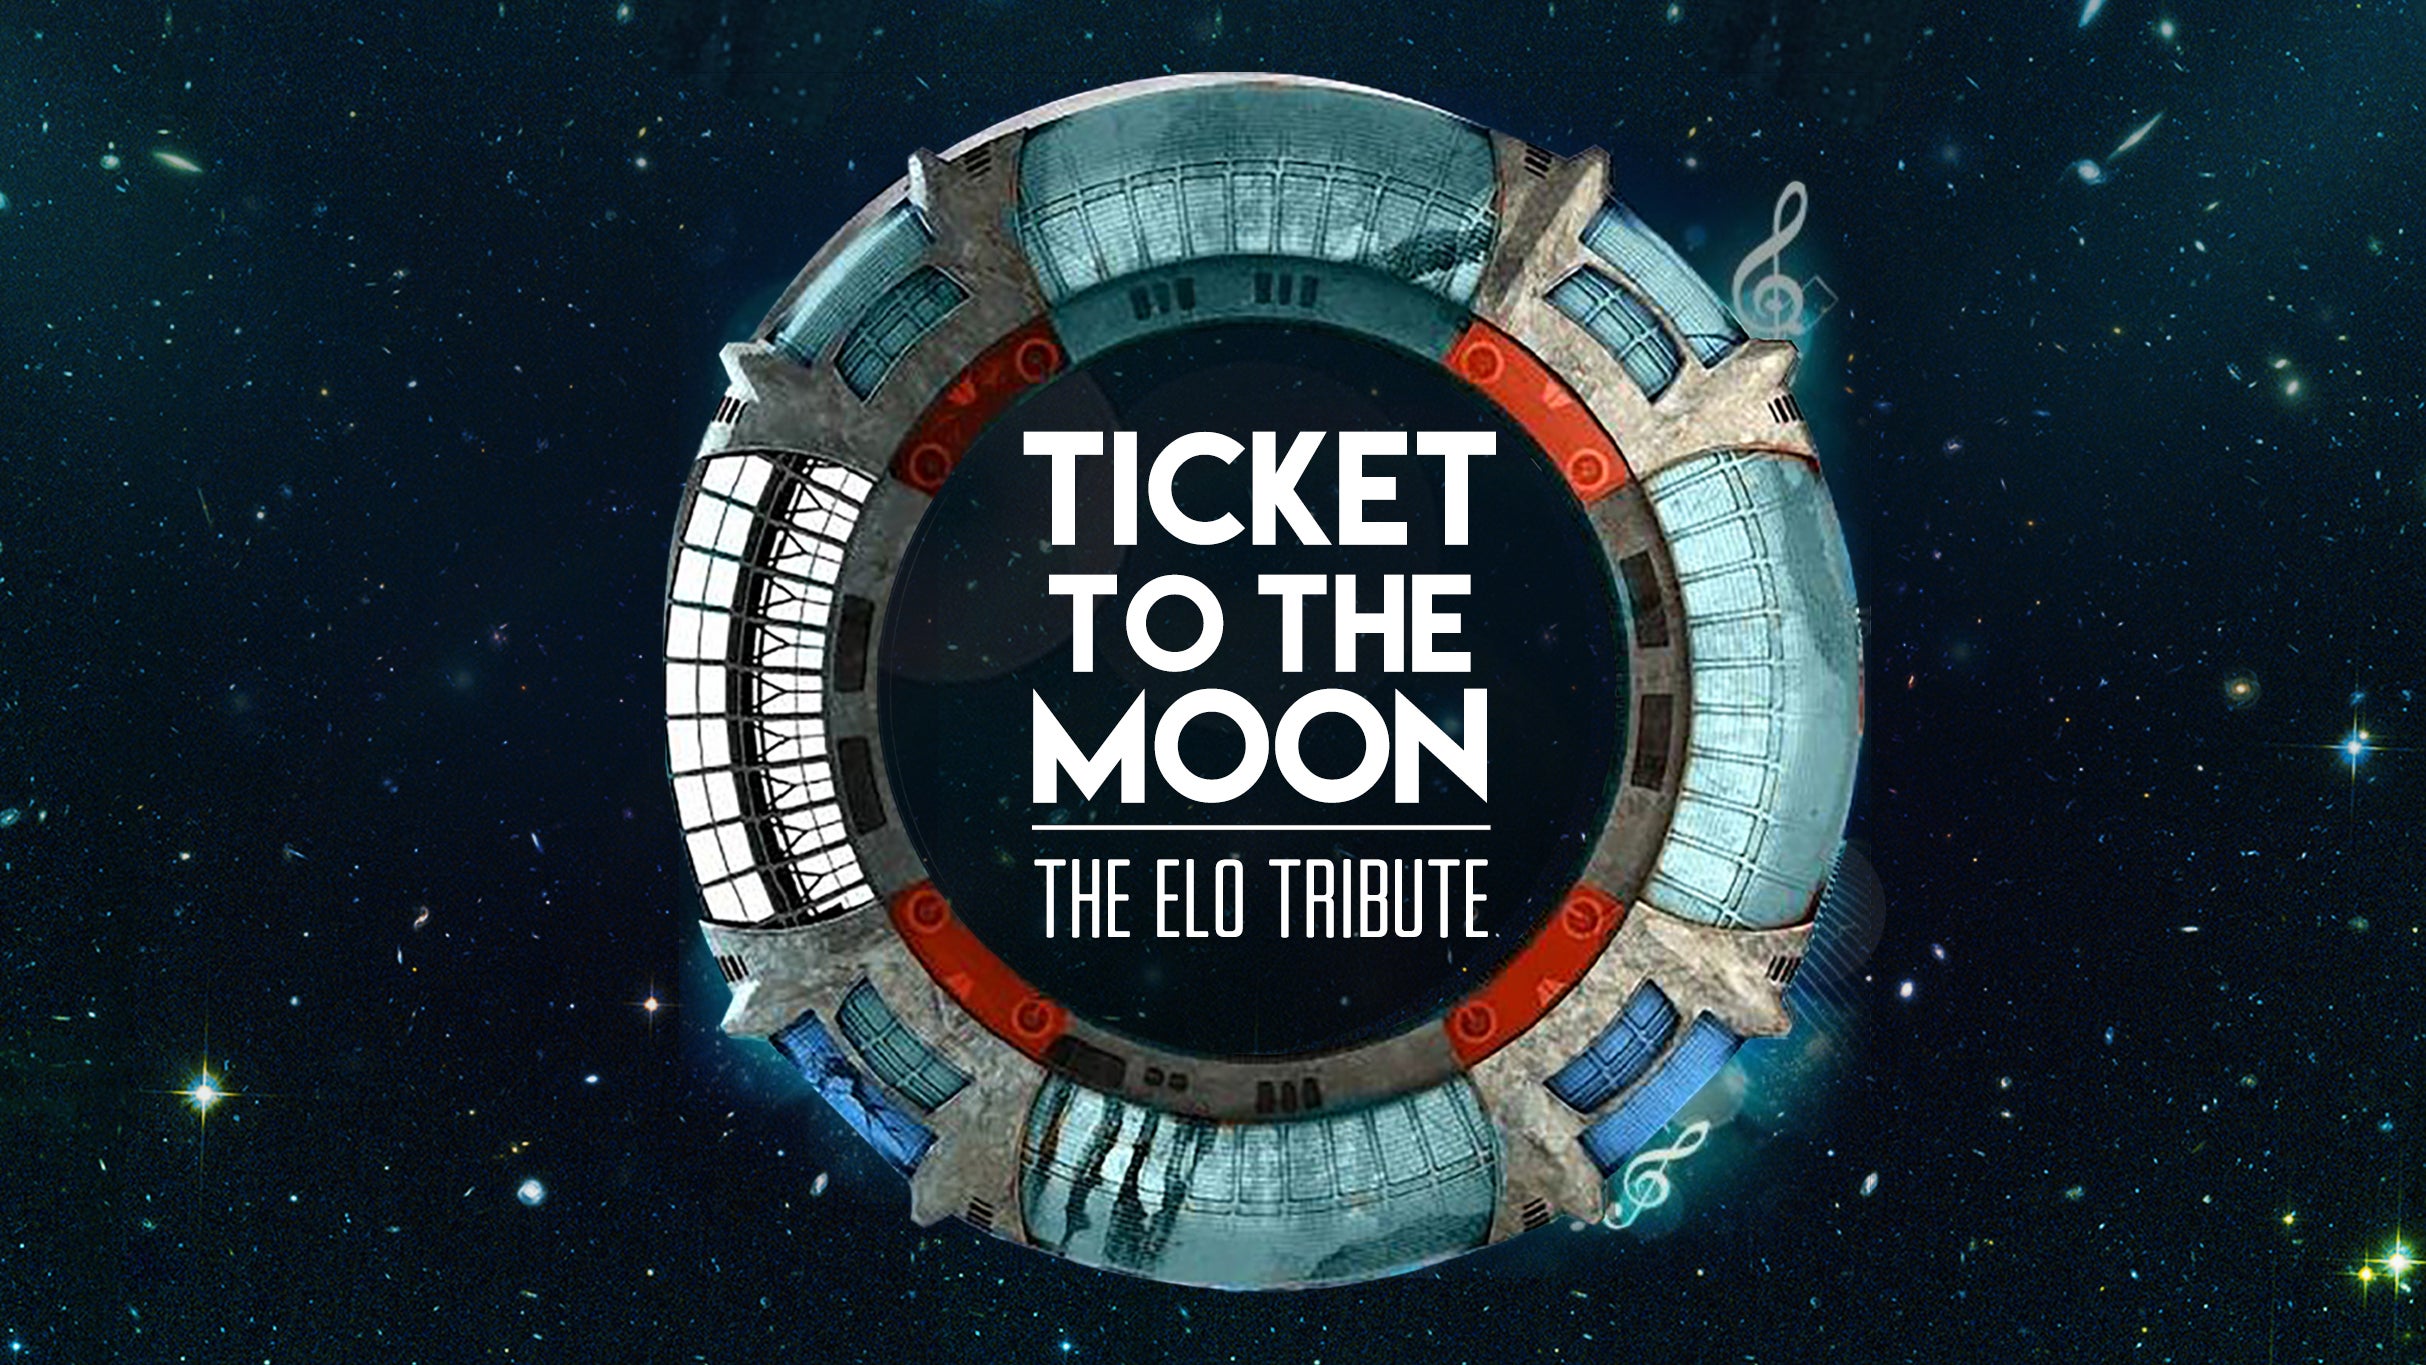 working presale password to Ticket To The Moon - The Electric Light Orchestra Tribute advanced tickets in Costa Mesa